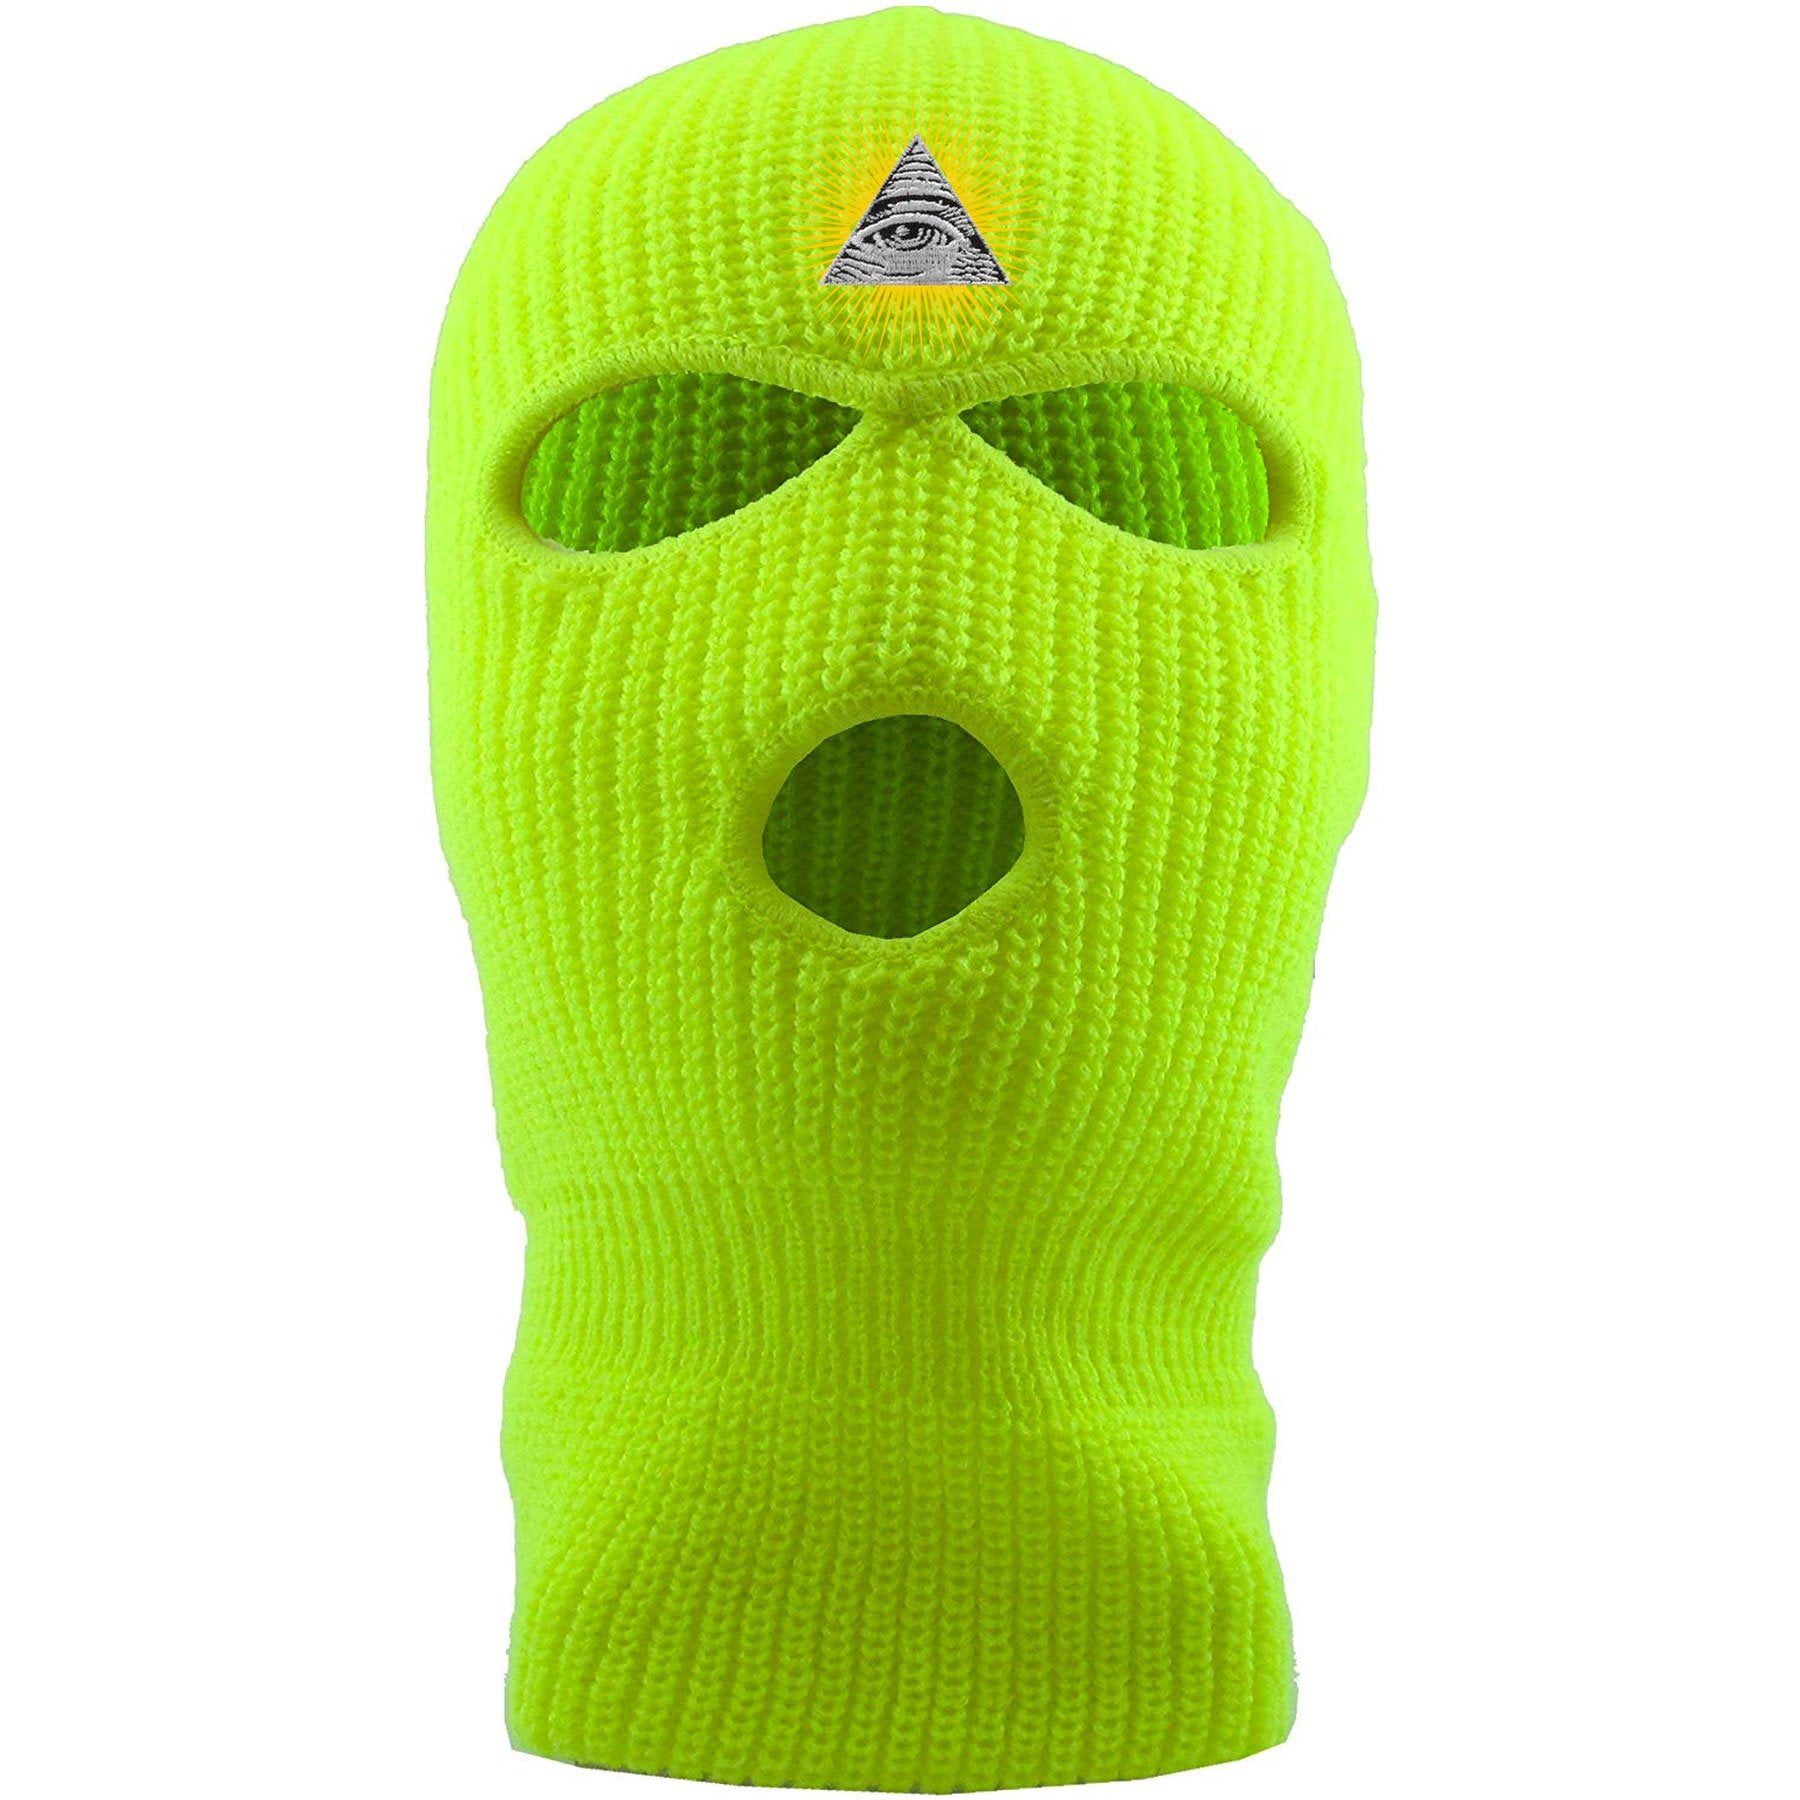 Embroidered on the forehead of the safety yellow pyramid ski mask is the all seeing eye logo embroidered in white, black, and gold jackboys ski mask